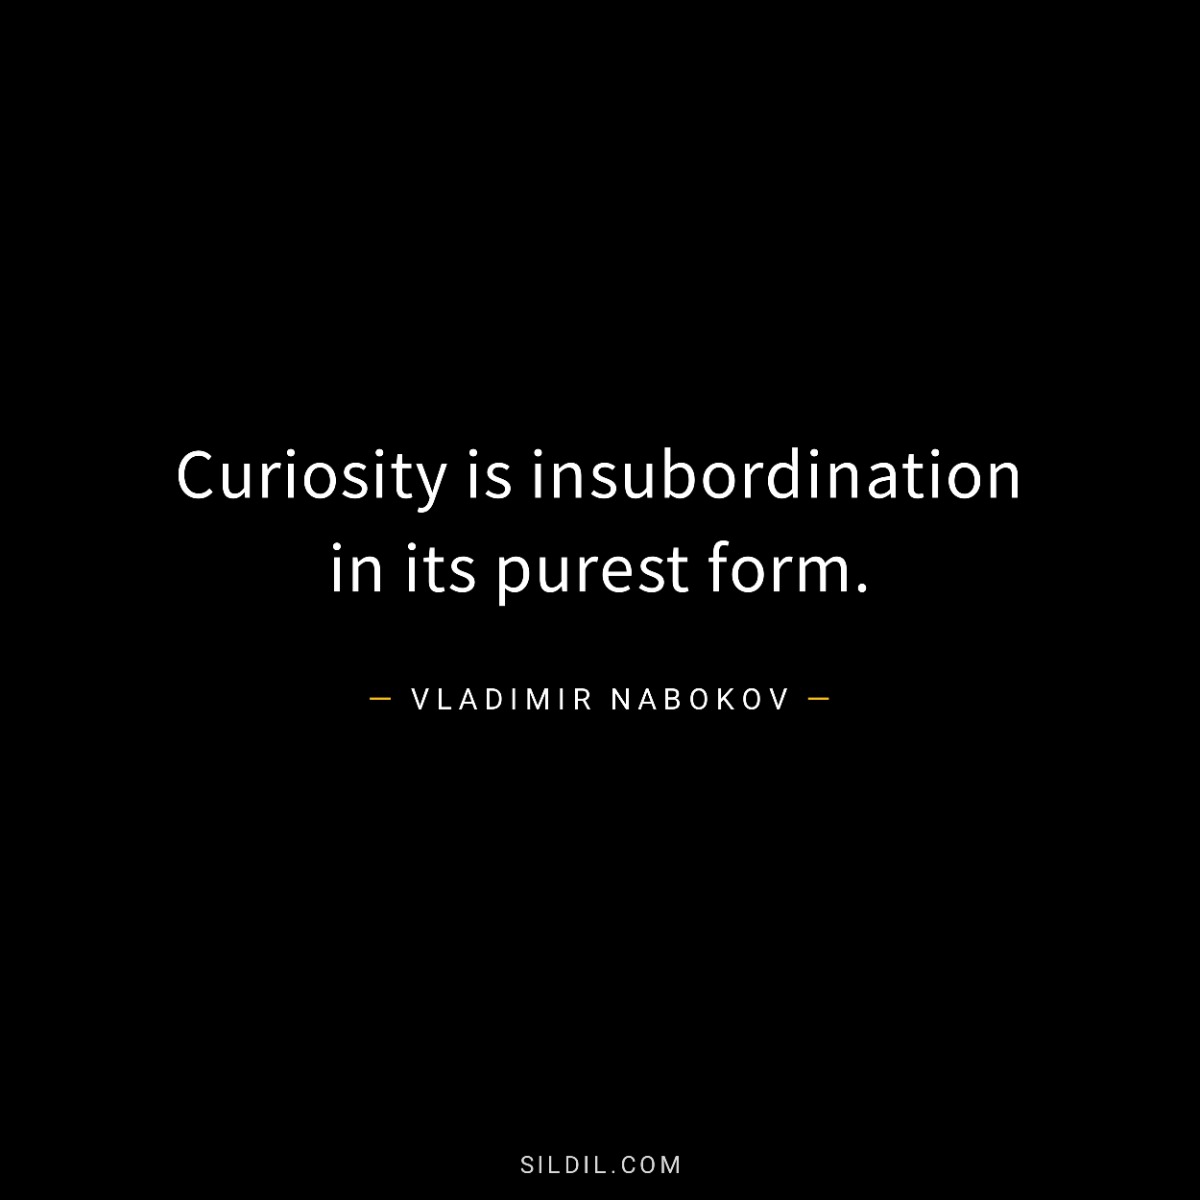 Curiosity is insubordination in its purest form.